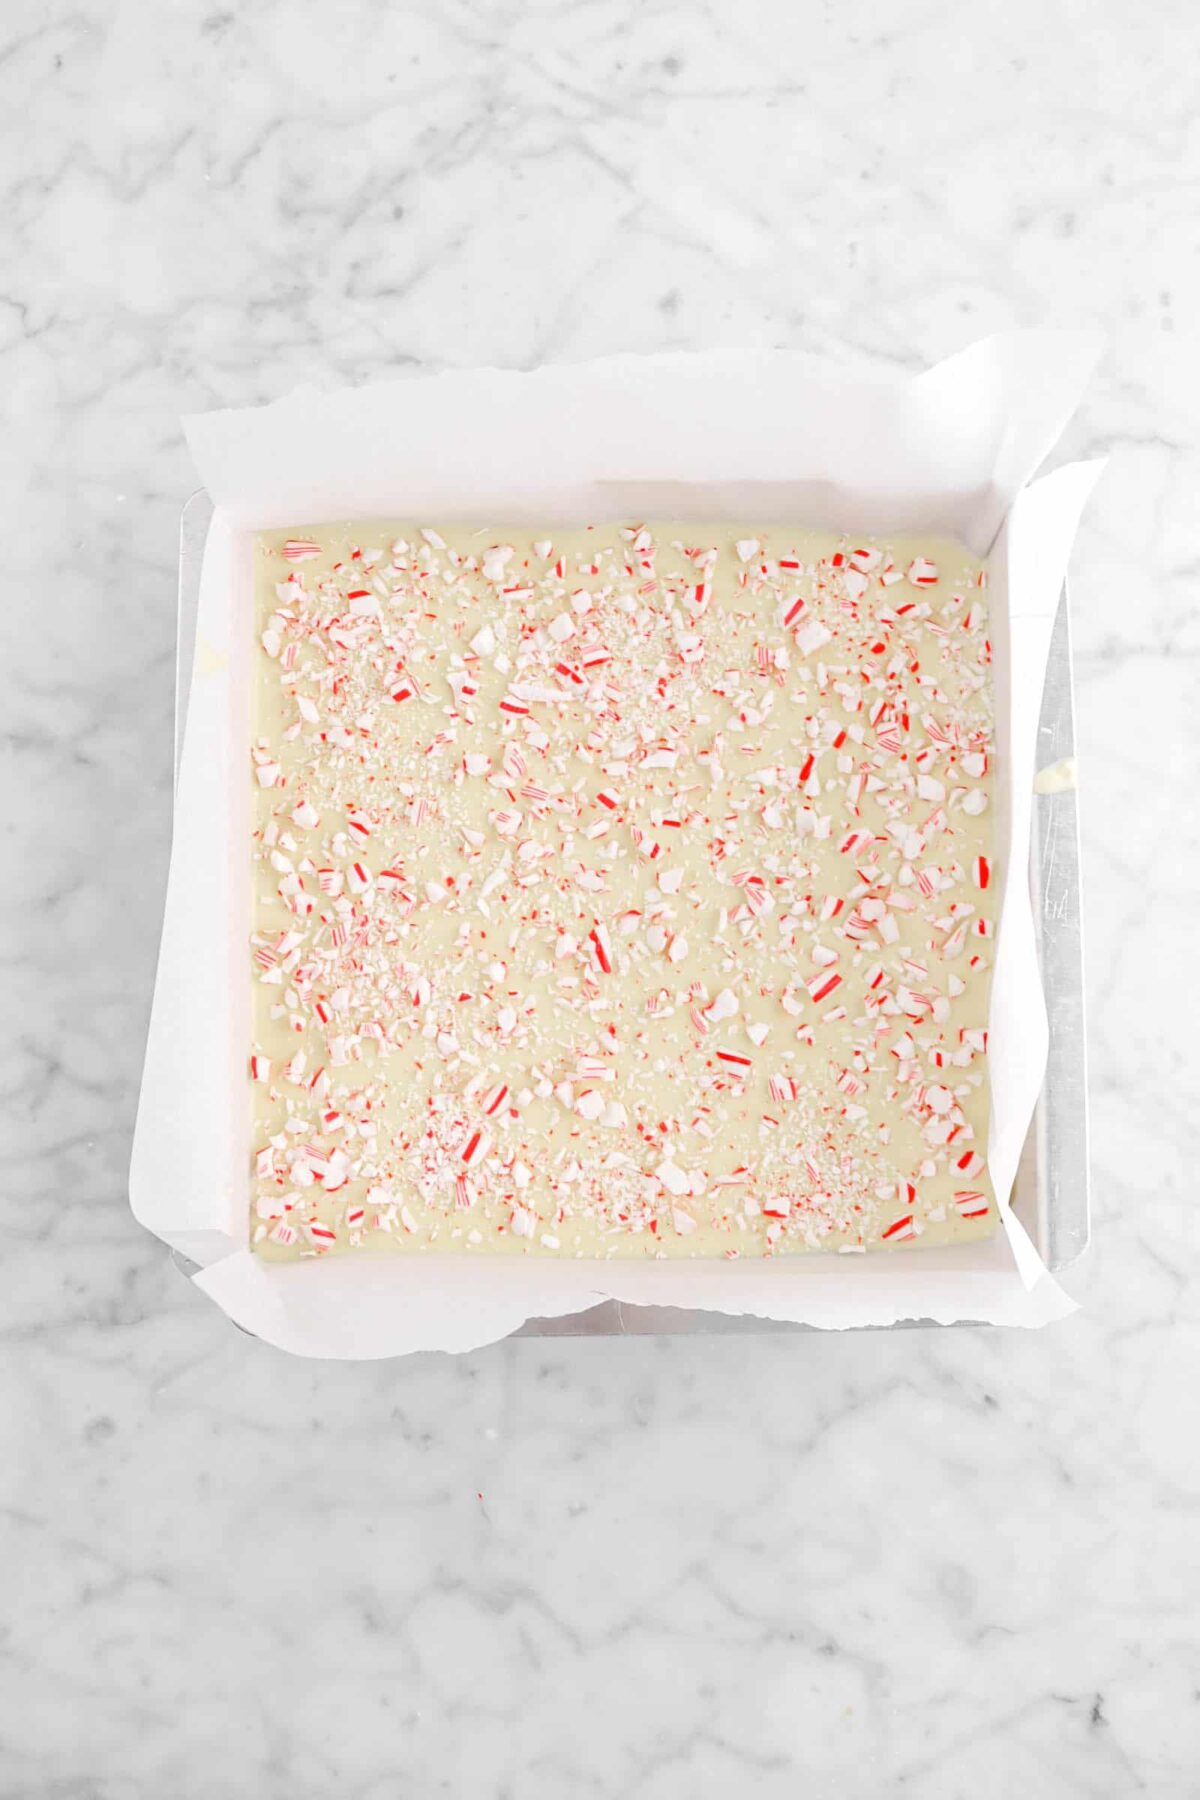 crushed candy canes sprinkled on top of white chocolate